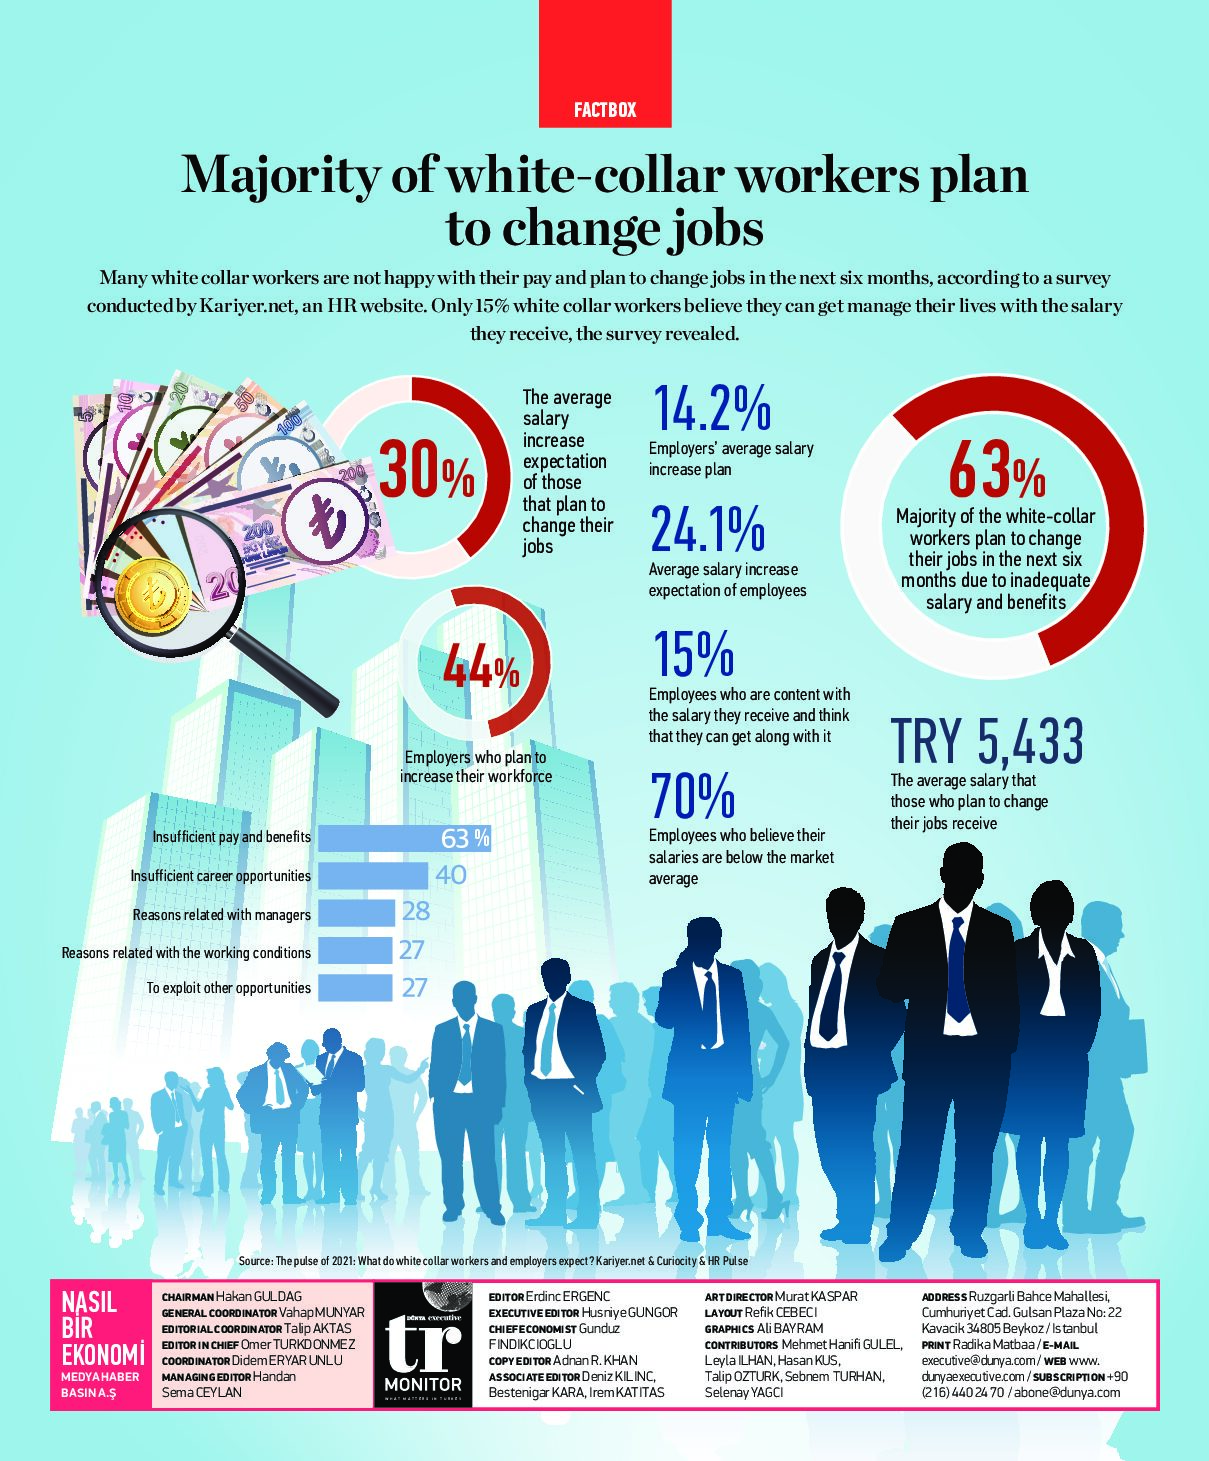 Majority of white-collar workers plan to change jobs